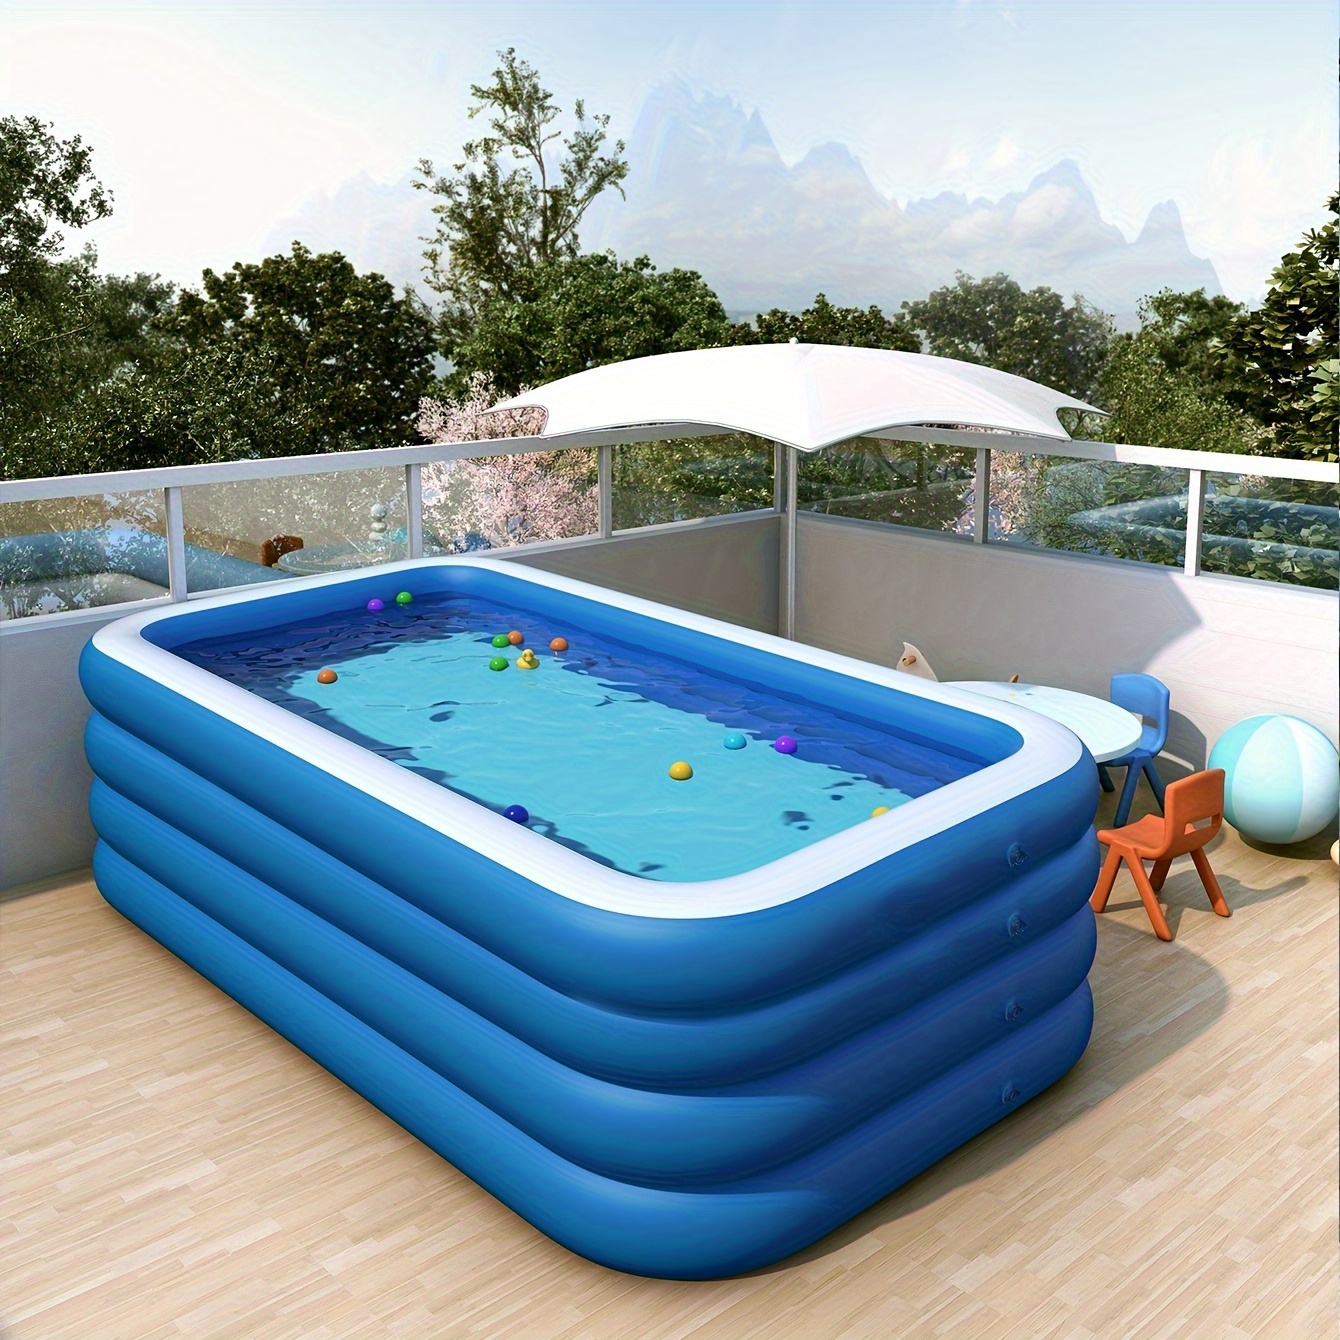 

Extra-large Inflatable Family Swimming Pool - Blue & White, 68.9x49.21x22.05 Inches, Thickened Single-layer Bottom For Durability